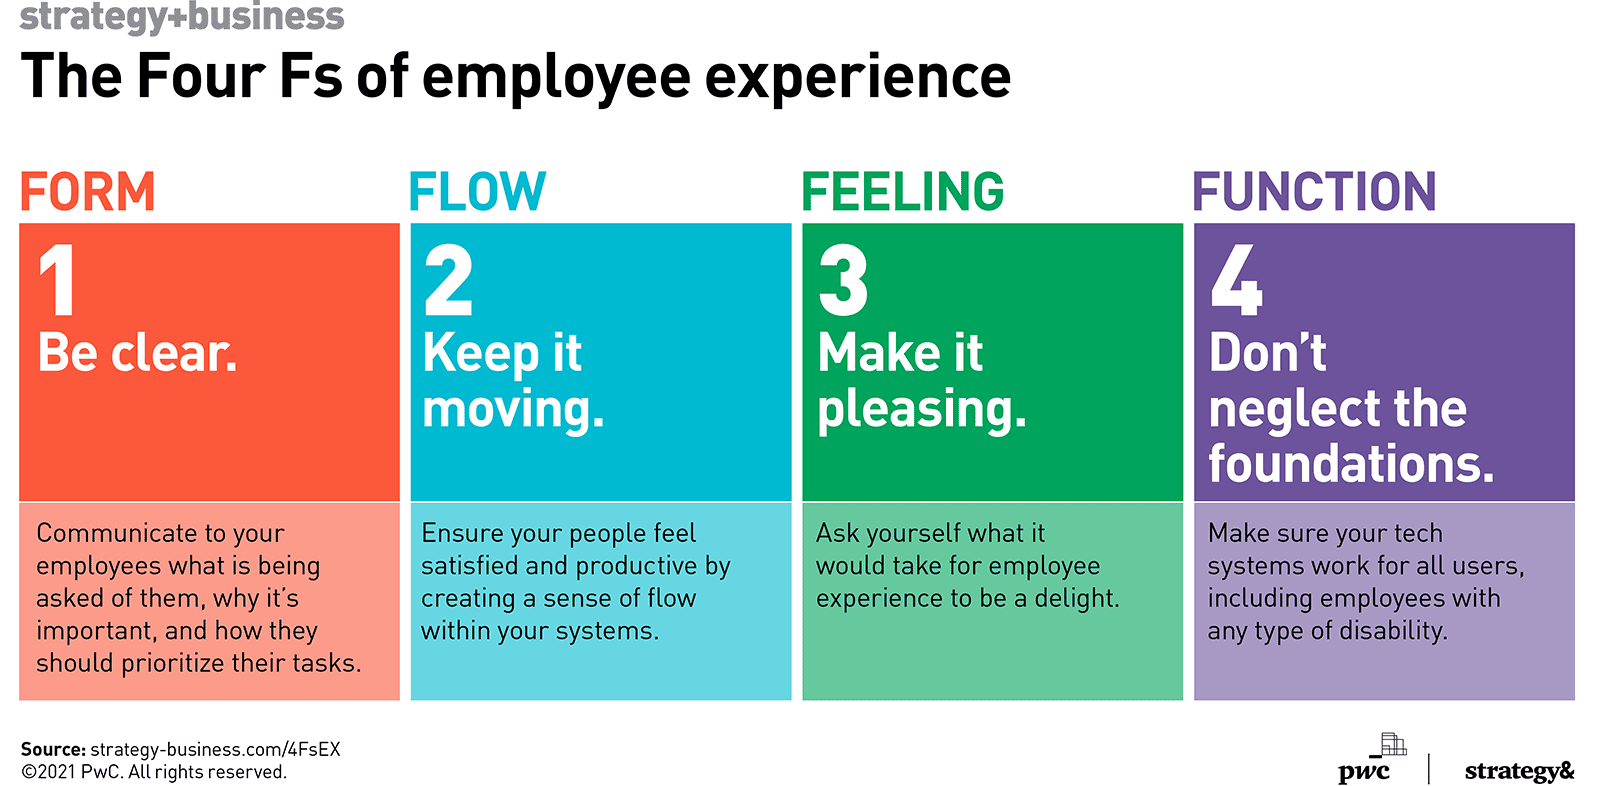 A chart outlining the Four Fs of employee experience: form, flow, feeling, and function.